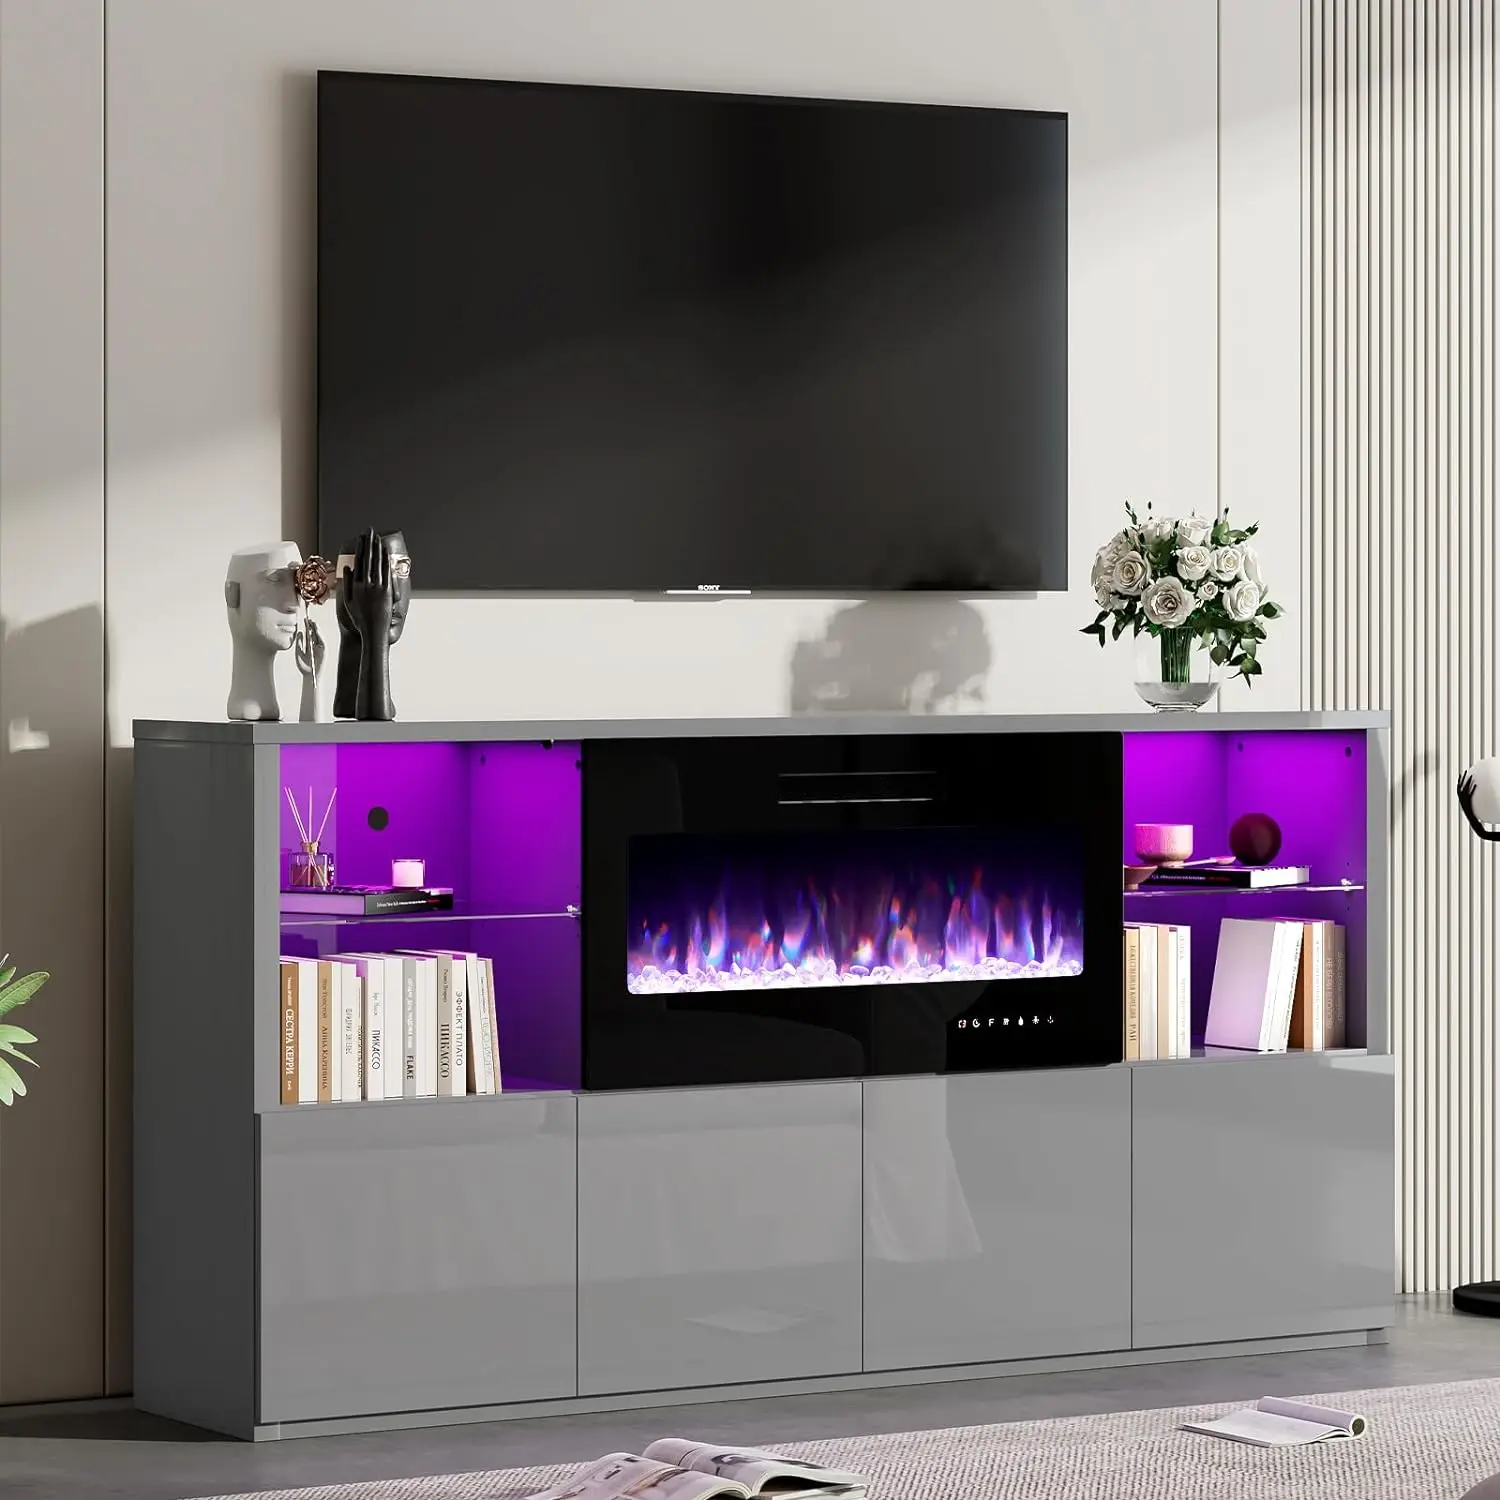 

68" Modern Fireplace TV Stand for TVs up to 75", High Gloss Entertainment Center with 40" Fireplace, 4 Shelves &Storage Cabinets